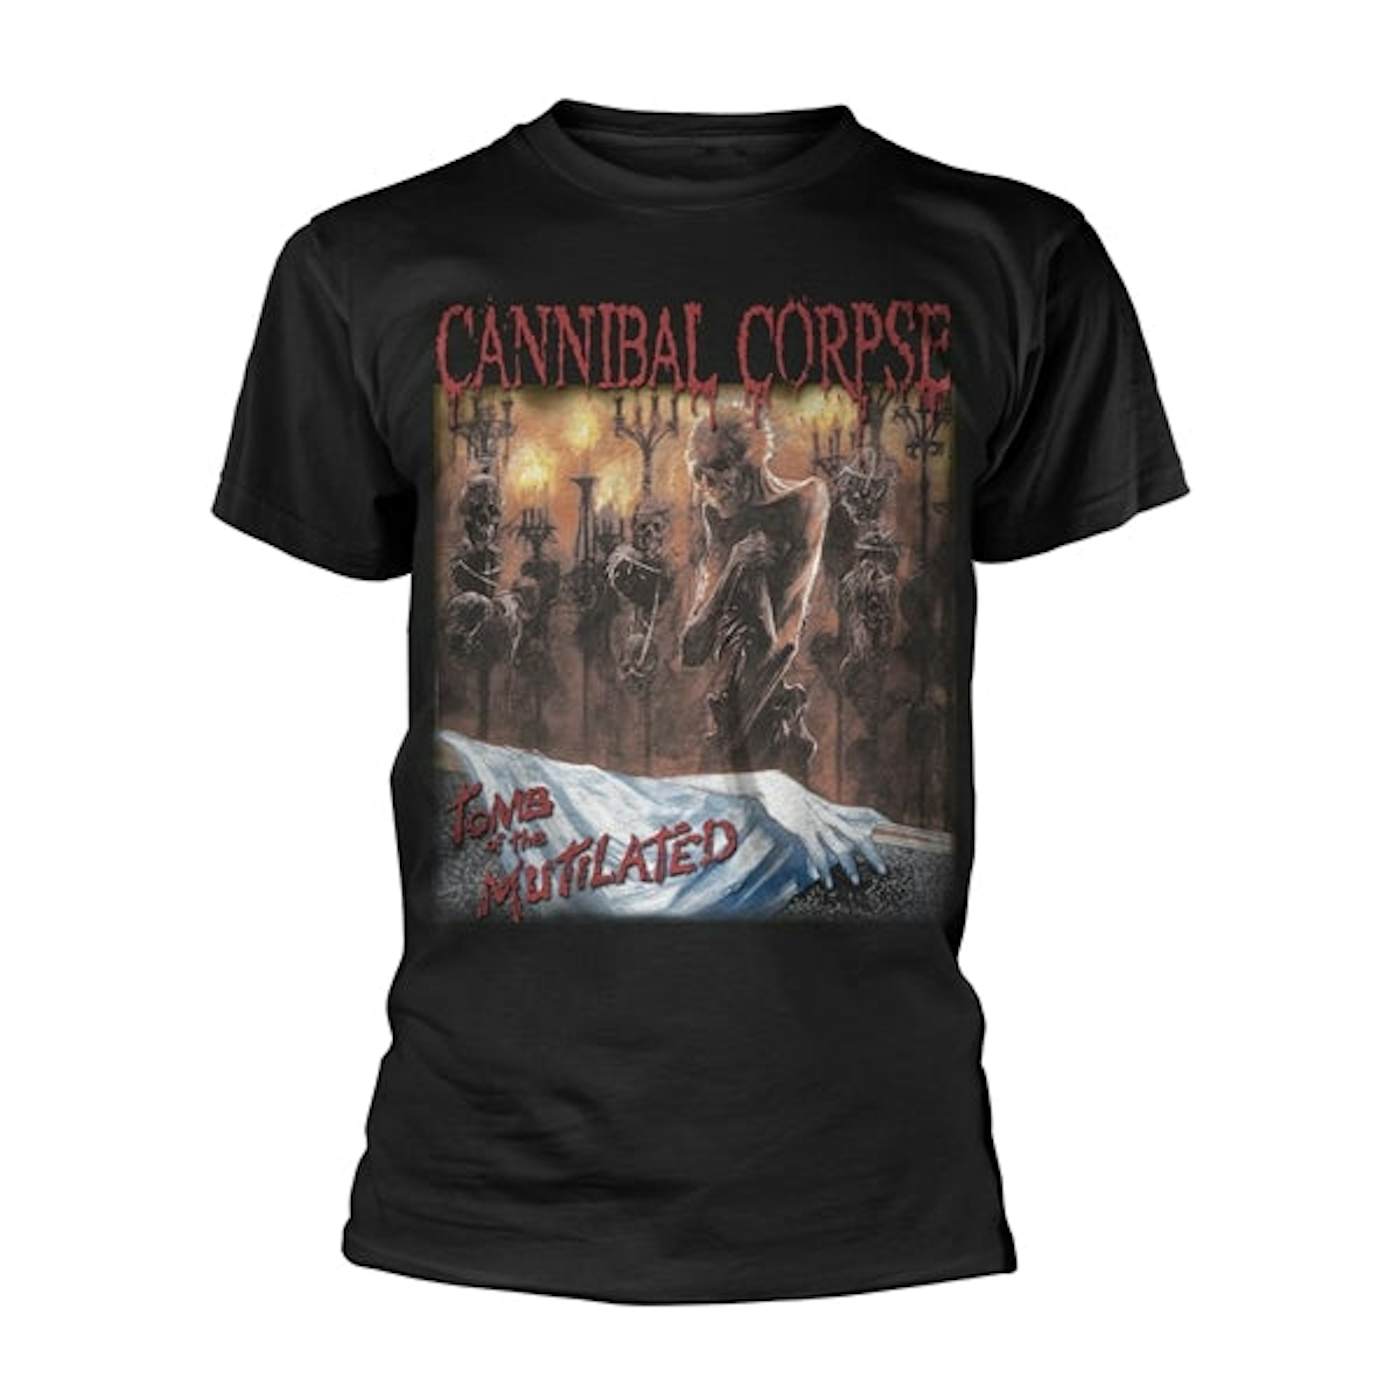 Cannibal Corpse T-Shirt - Tomb Of The Mutilated